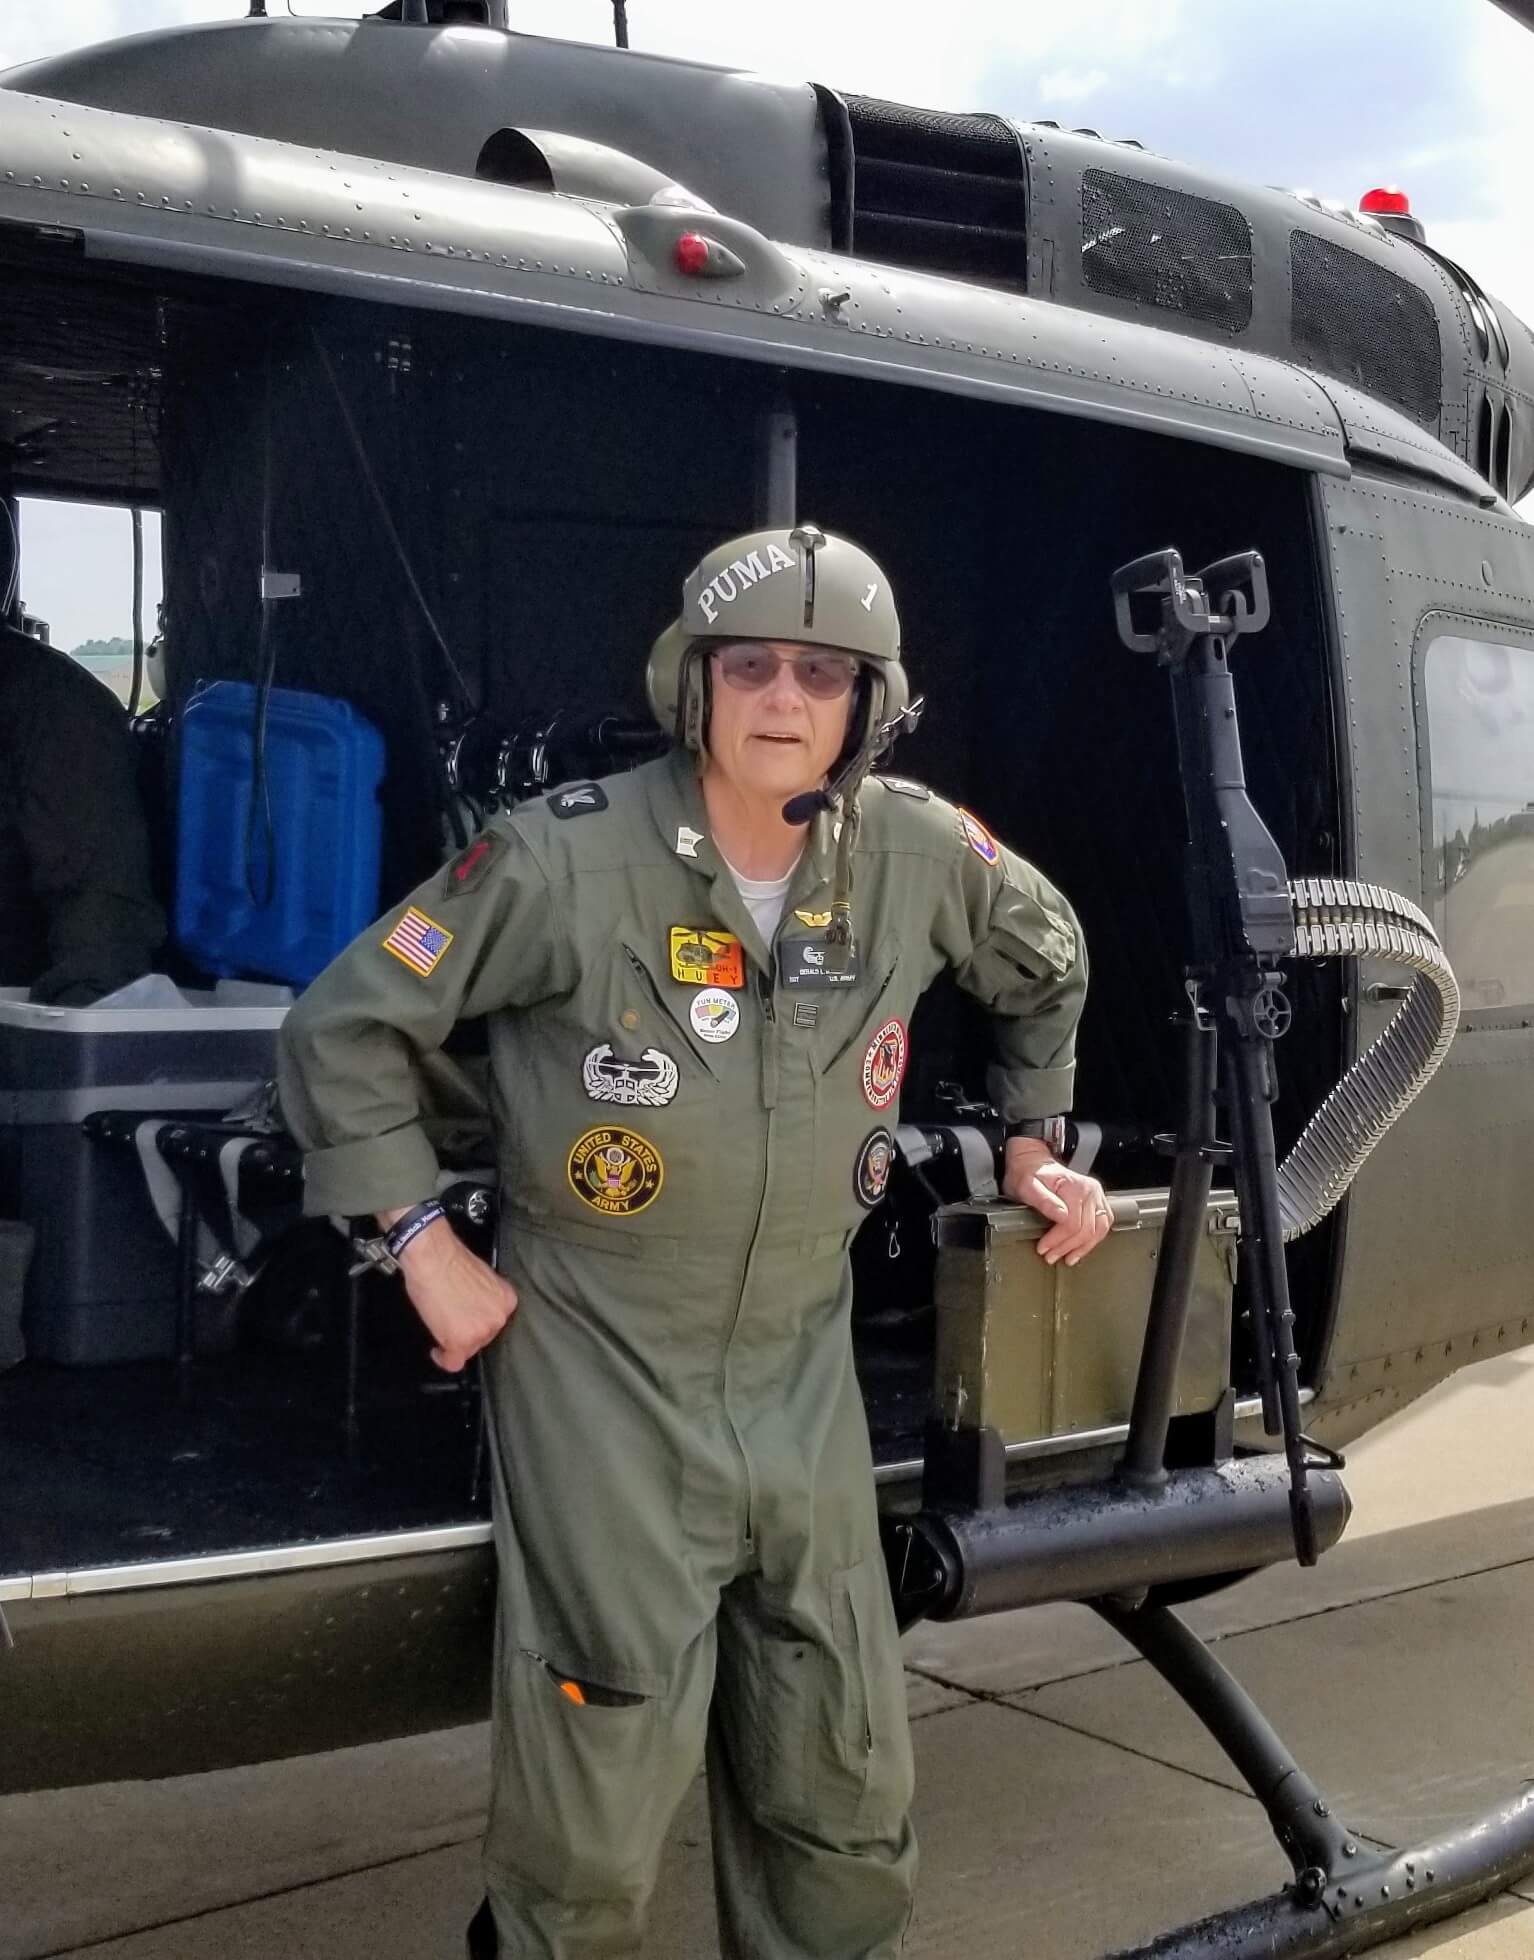 Man in flight suit in front of a Huey Helicopter